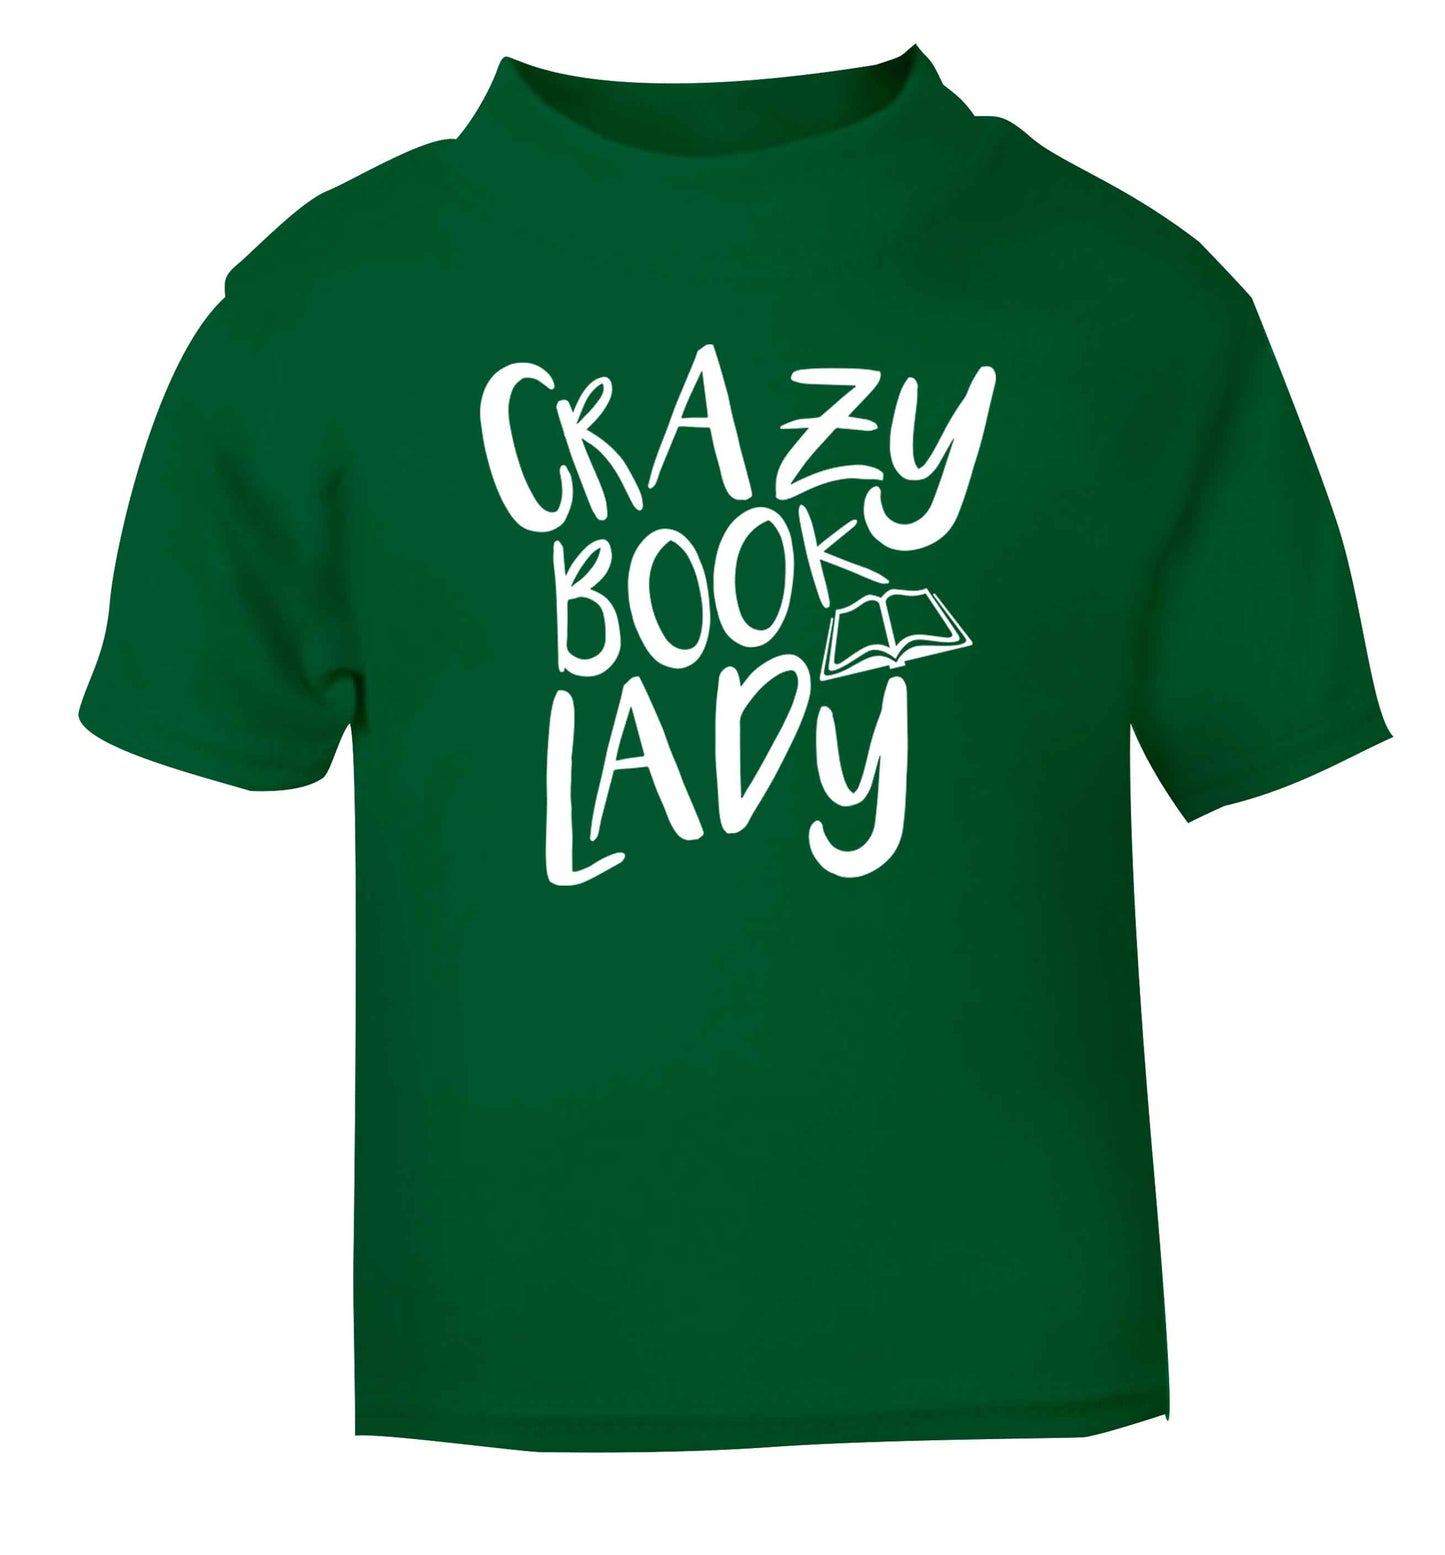 Crazy book lady green Baby Toddler Tshirt 2 Years